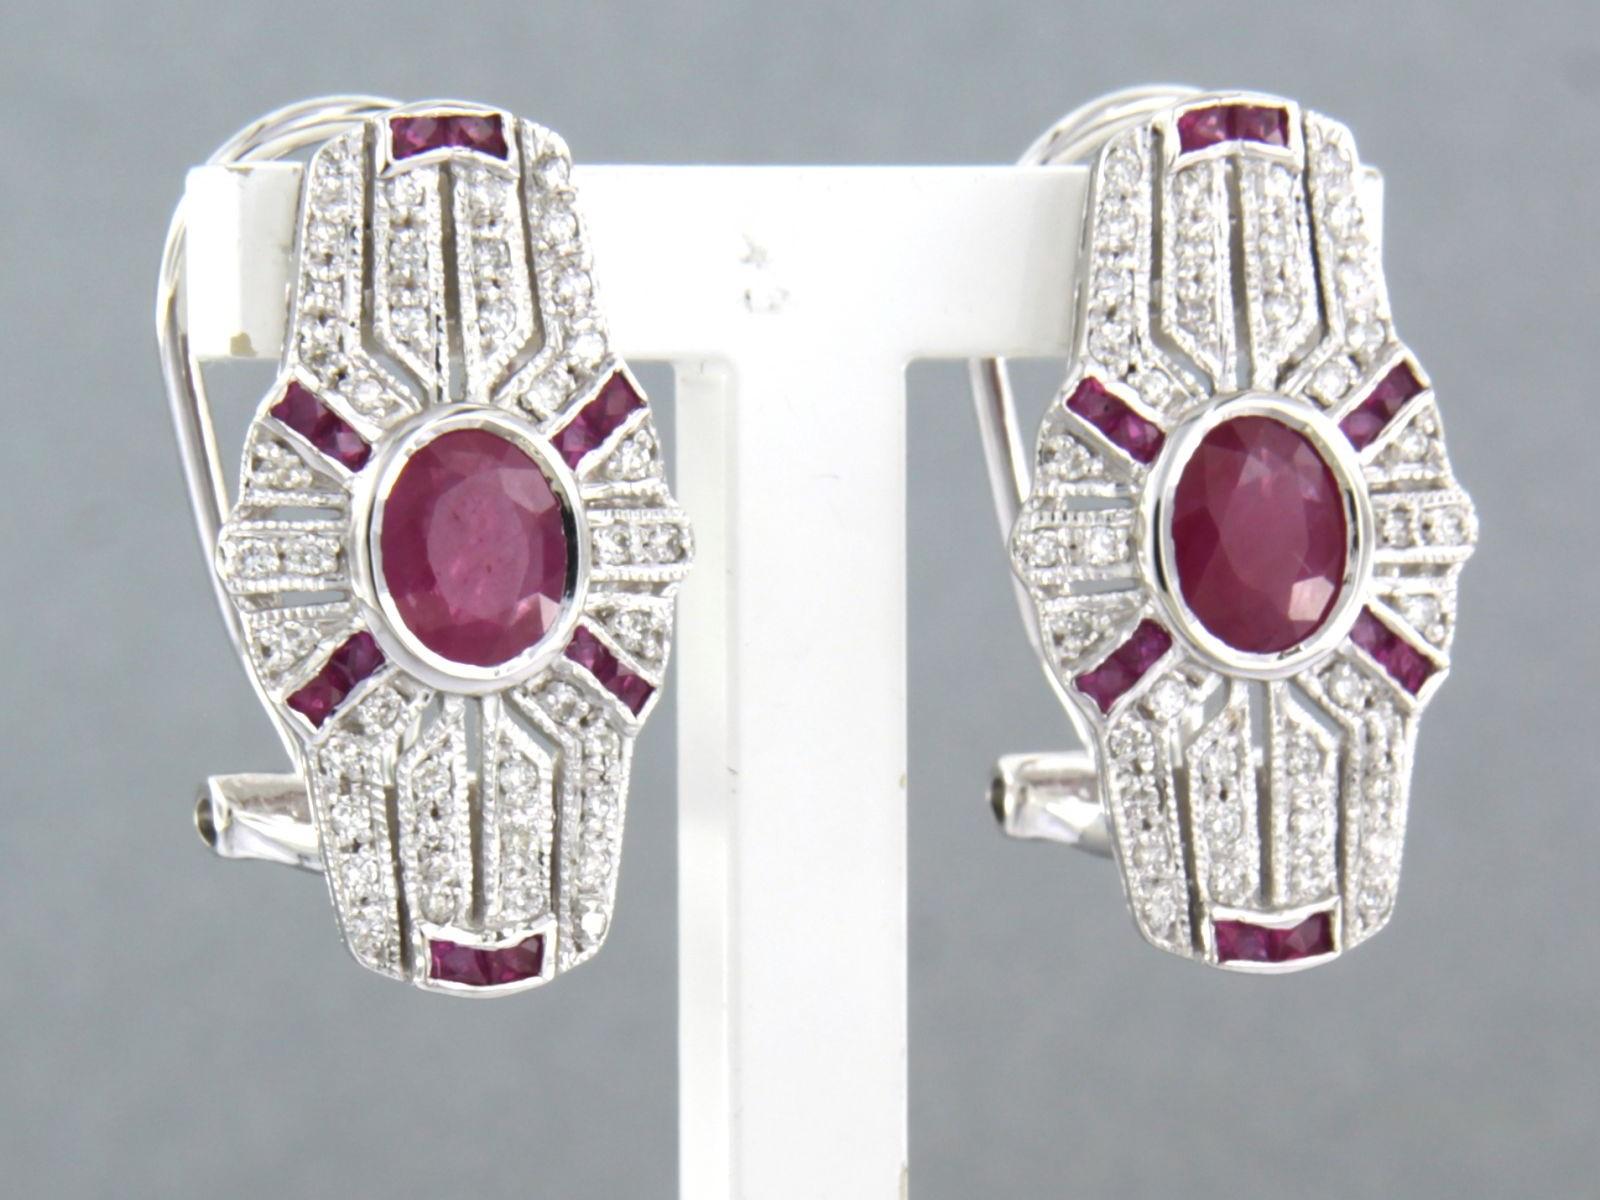 14k white gold ear clips set with sapphire and single cut diamond 0.34 ct - F/G - VS/SI

detailed description

the top of the ear clip is 2.1 cm long by 1.2 cm wide

weight 6.7 grams

set with

- 2 x 5.0 mm - 5.8 mm oval facet cut heated ruby, total